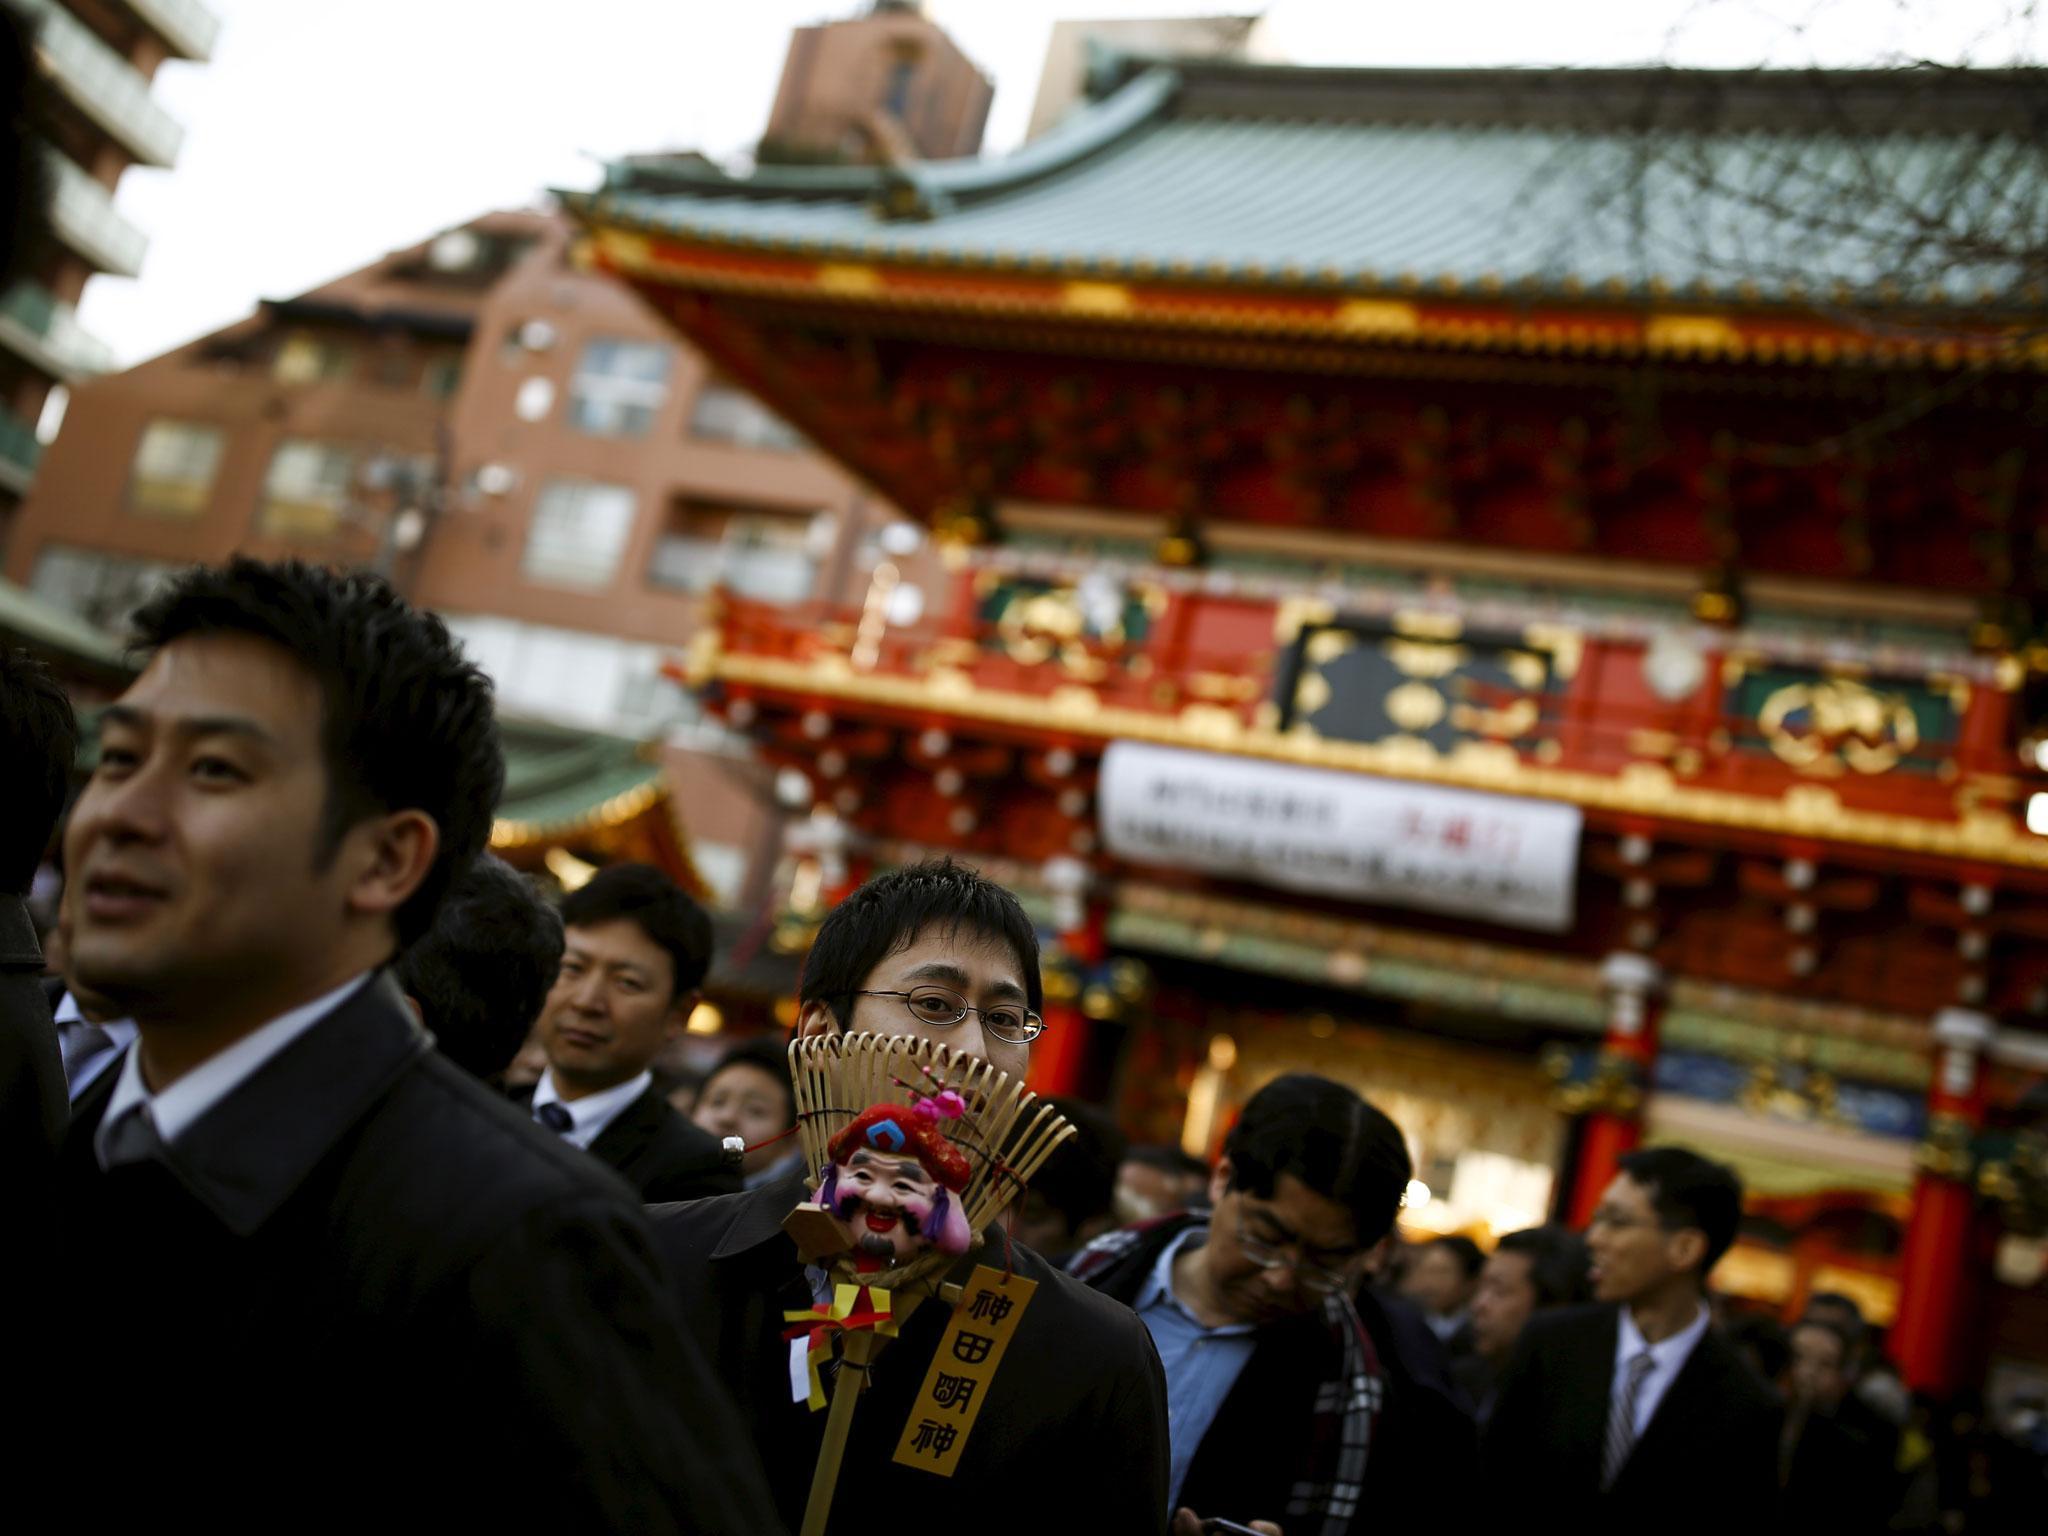 Japan has the world's oldest population and a shrinking birthrate